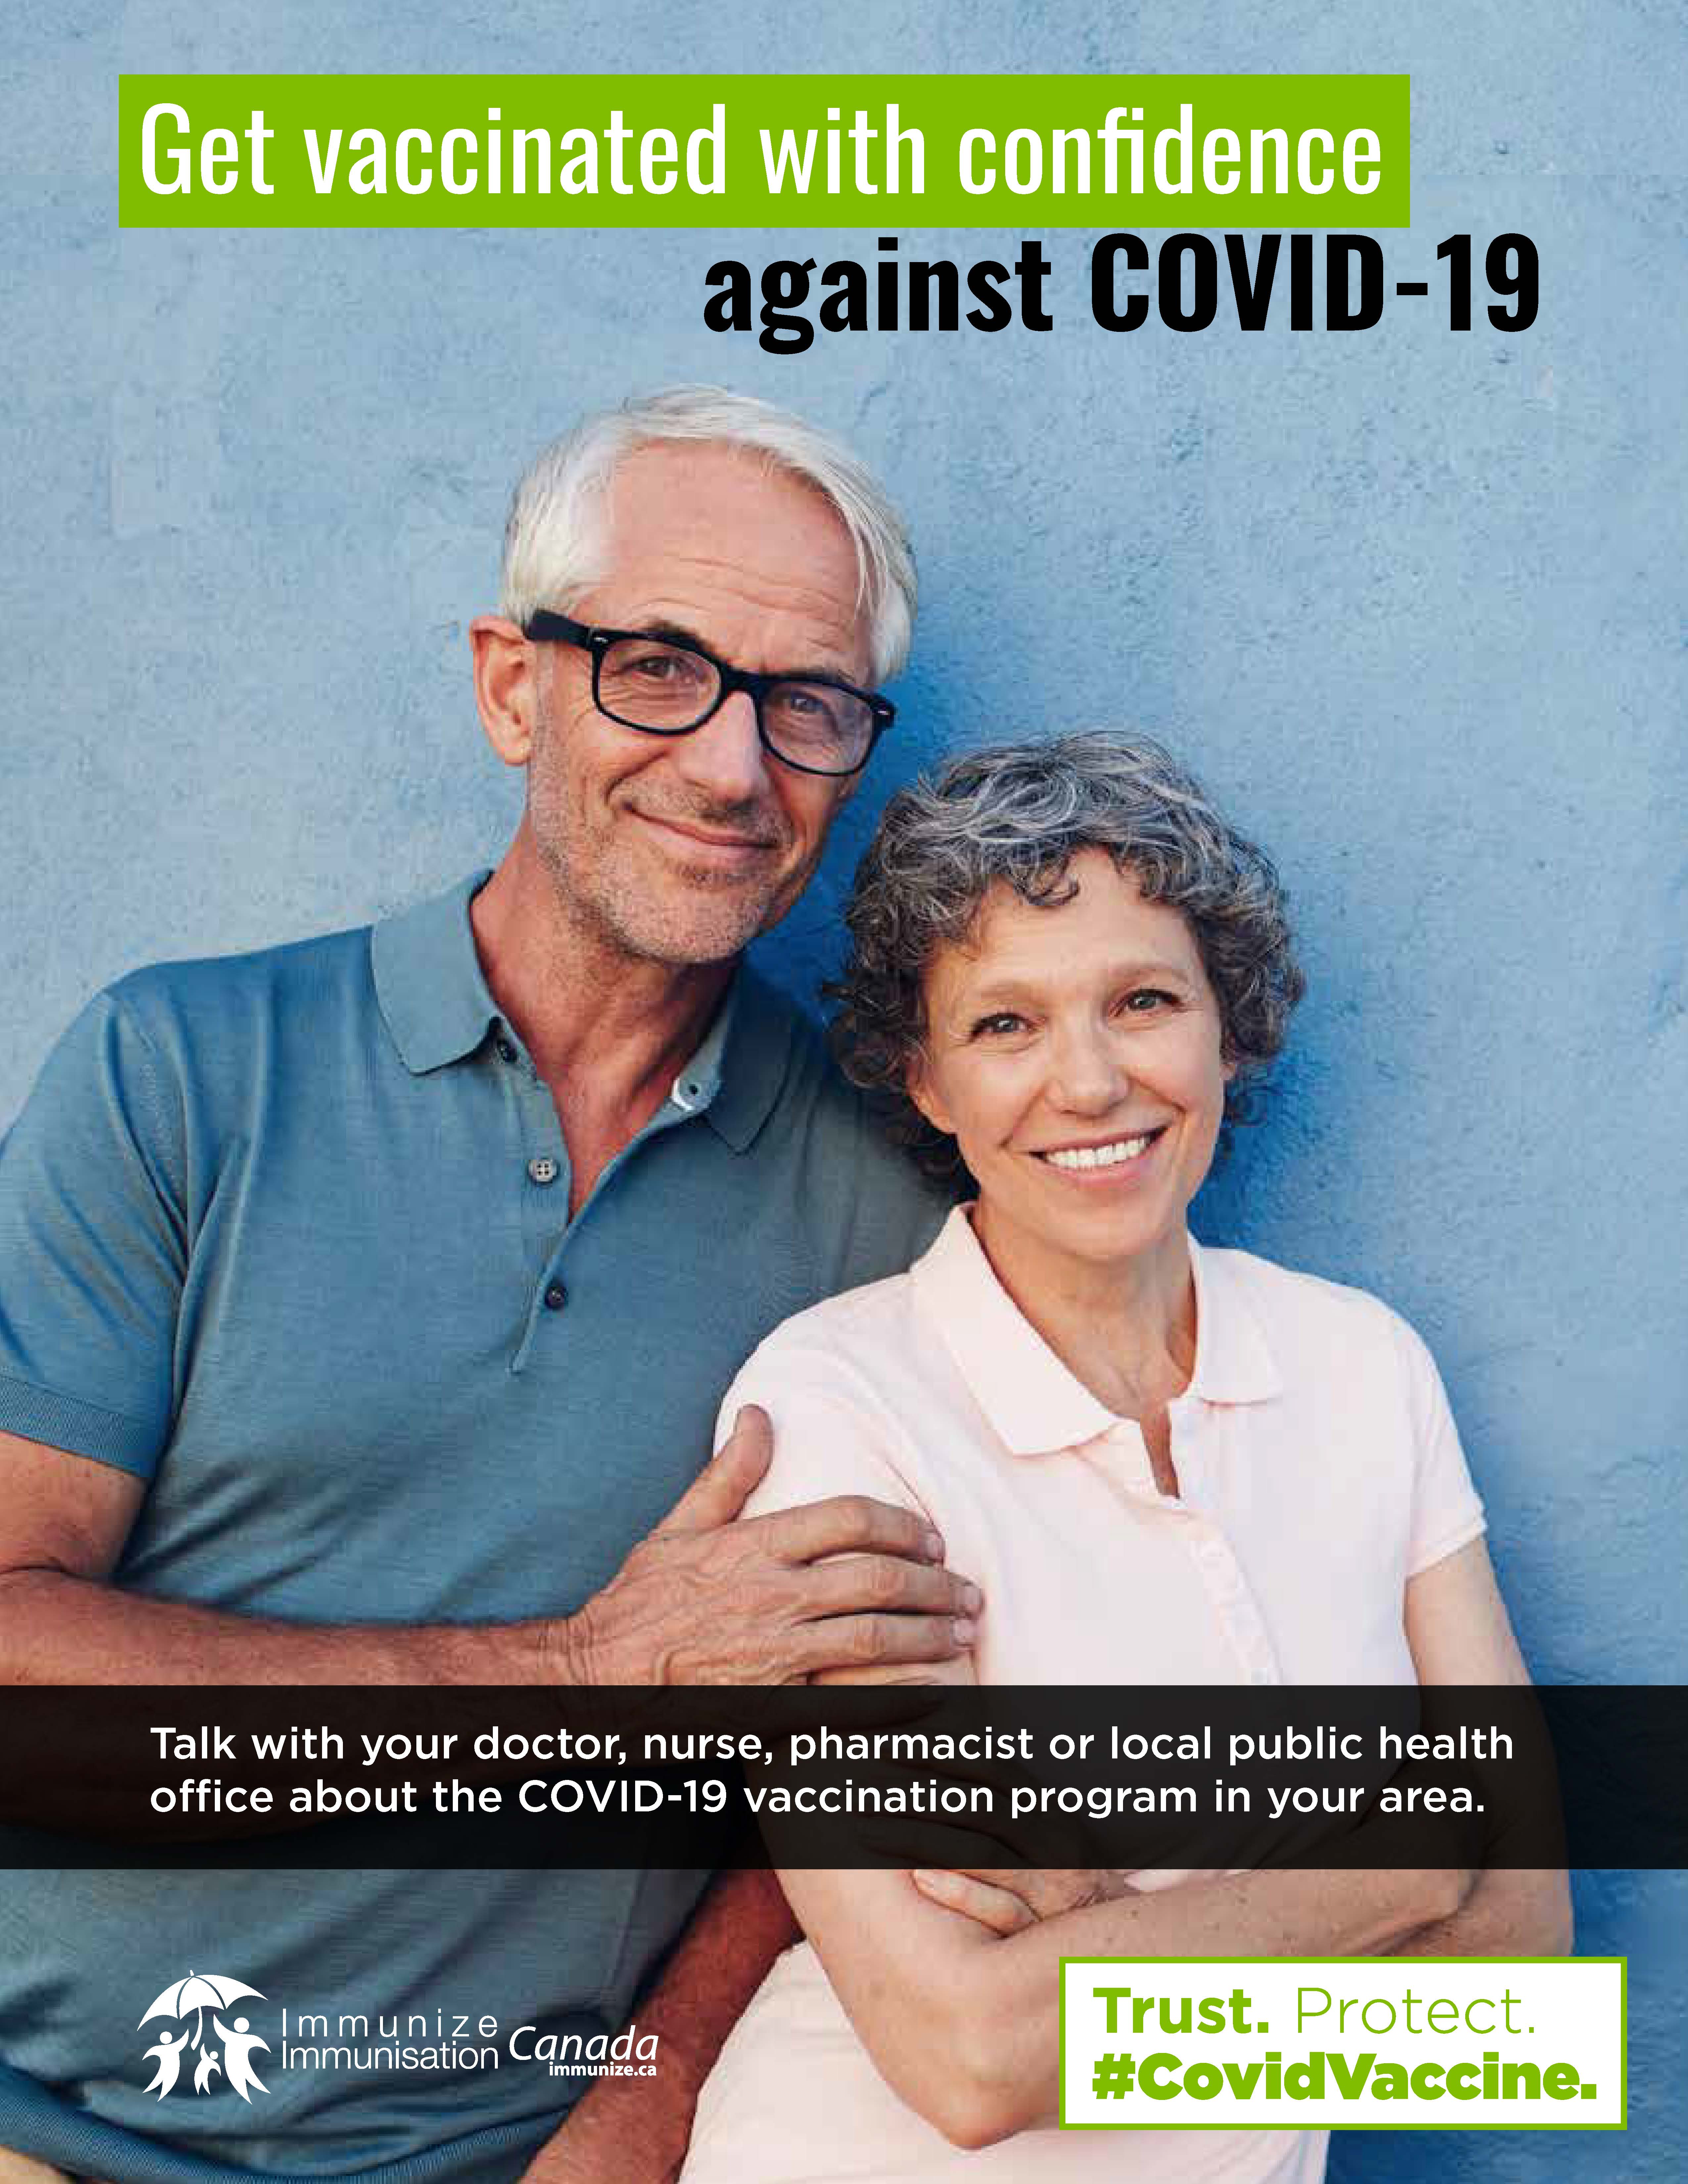 Get vaccinated with confidence against COVID-19: 55 plus